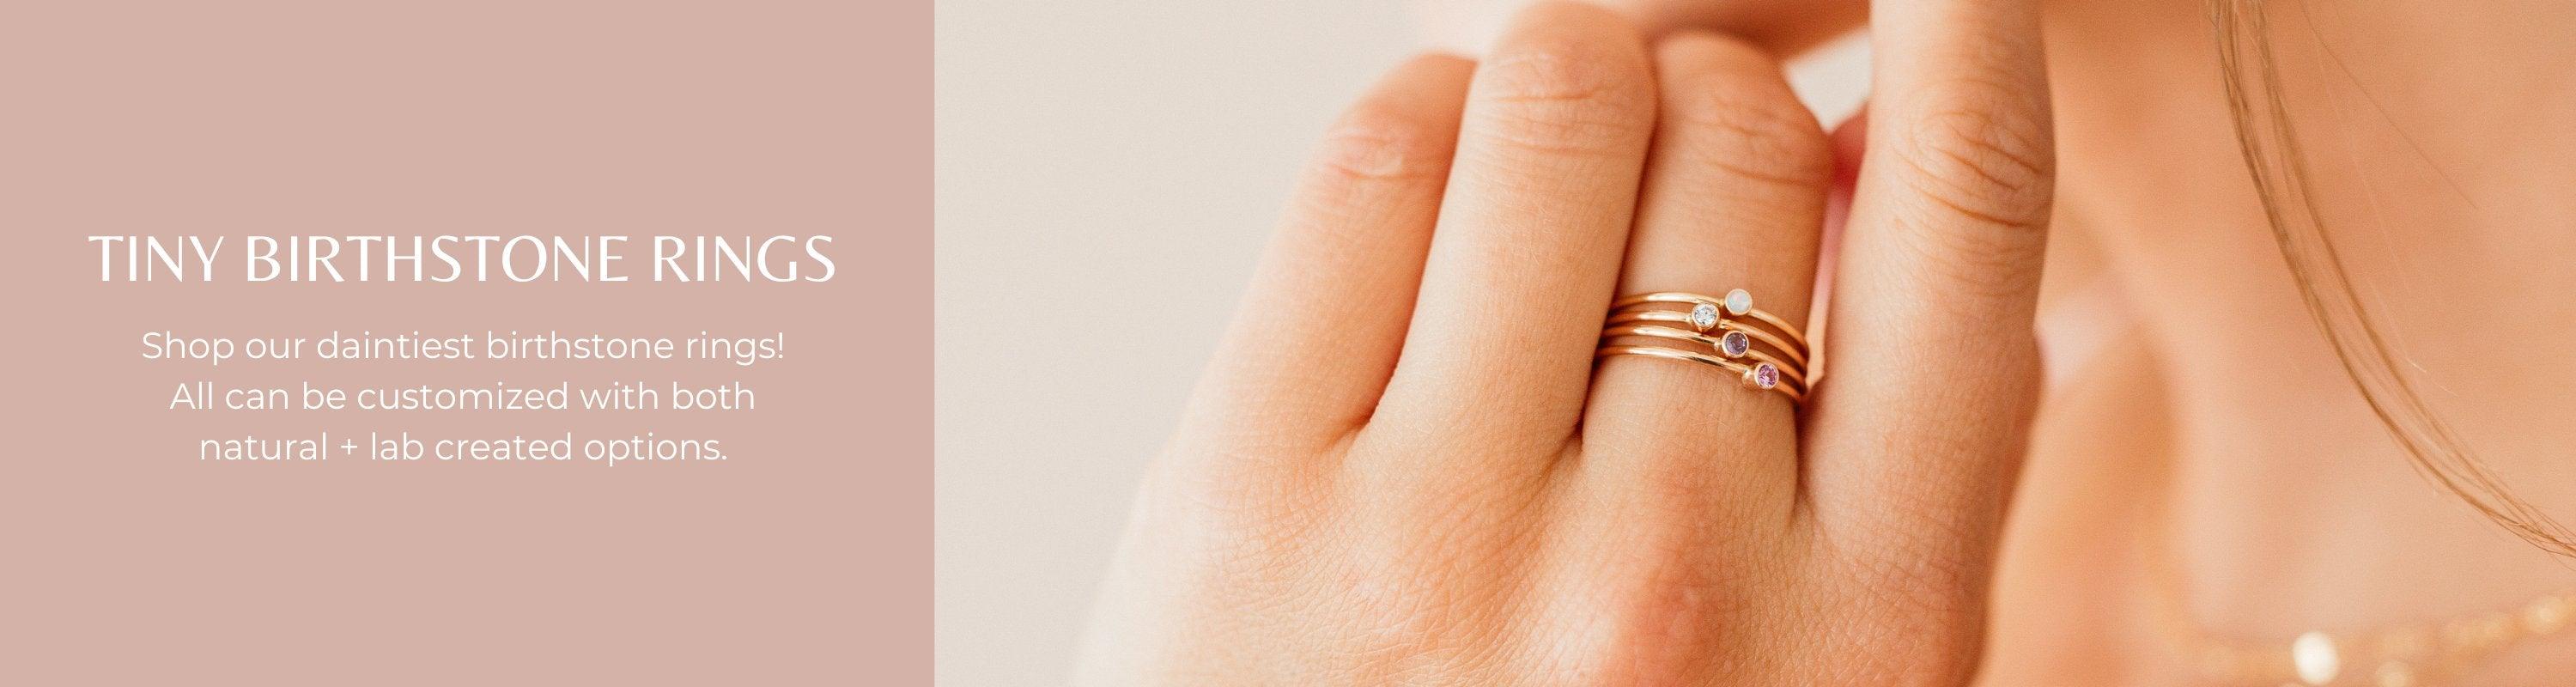 Tiny Birthstone Rings - Nolia Jewelry - Meaningful + Sustainably Handcrafted Jewelry